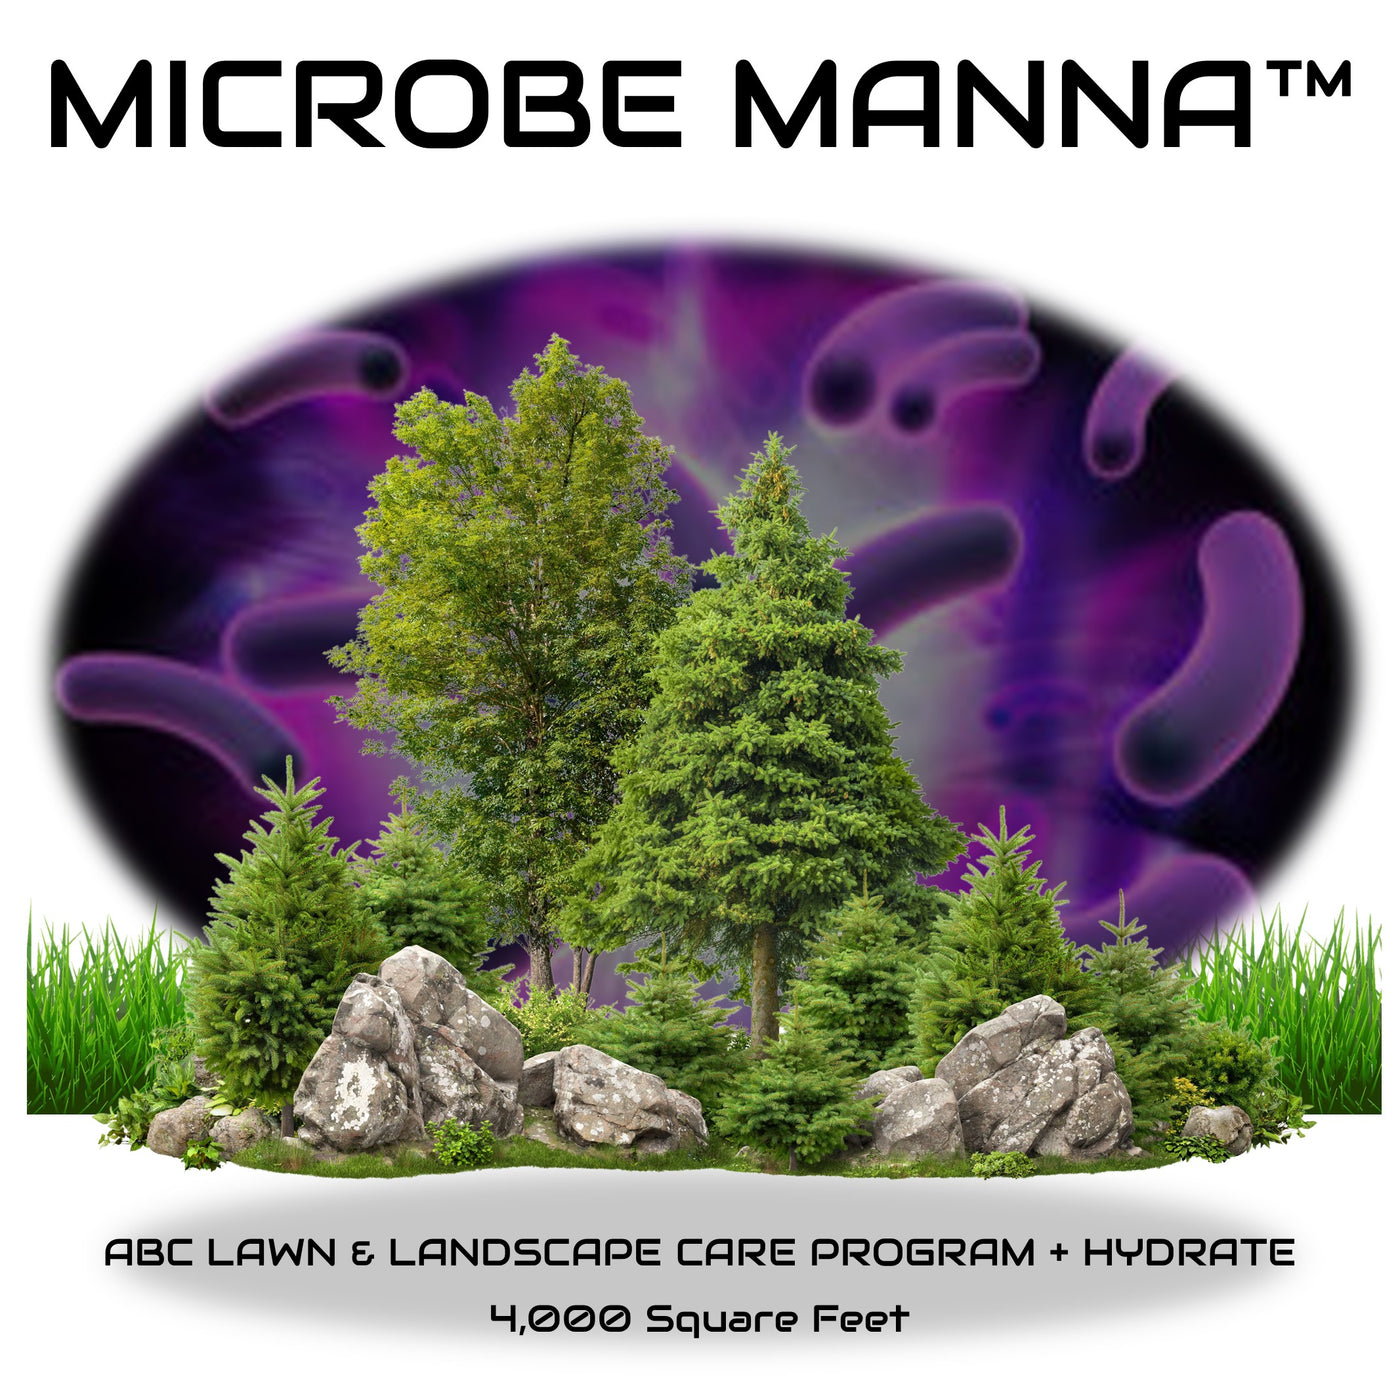 Microbe Manna ABC Lawn and Landscape Care Program and Hydrate for 4000 Square Feet